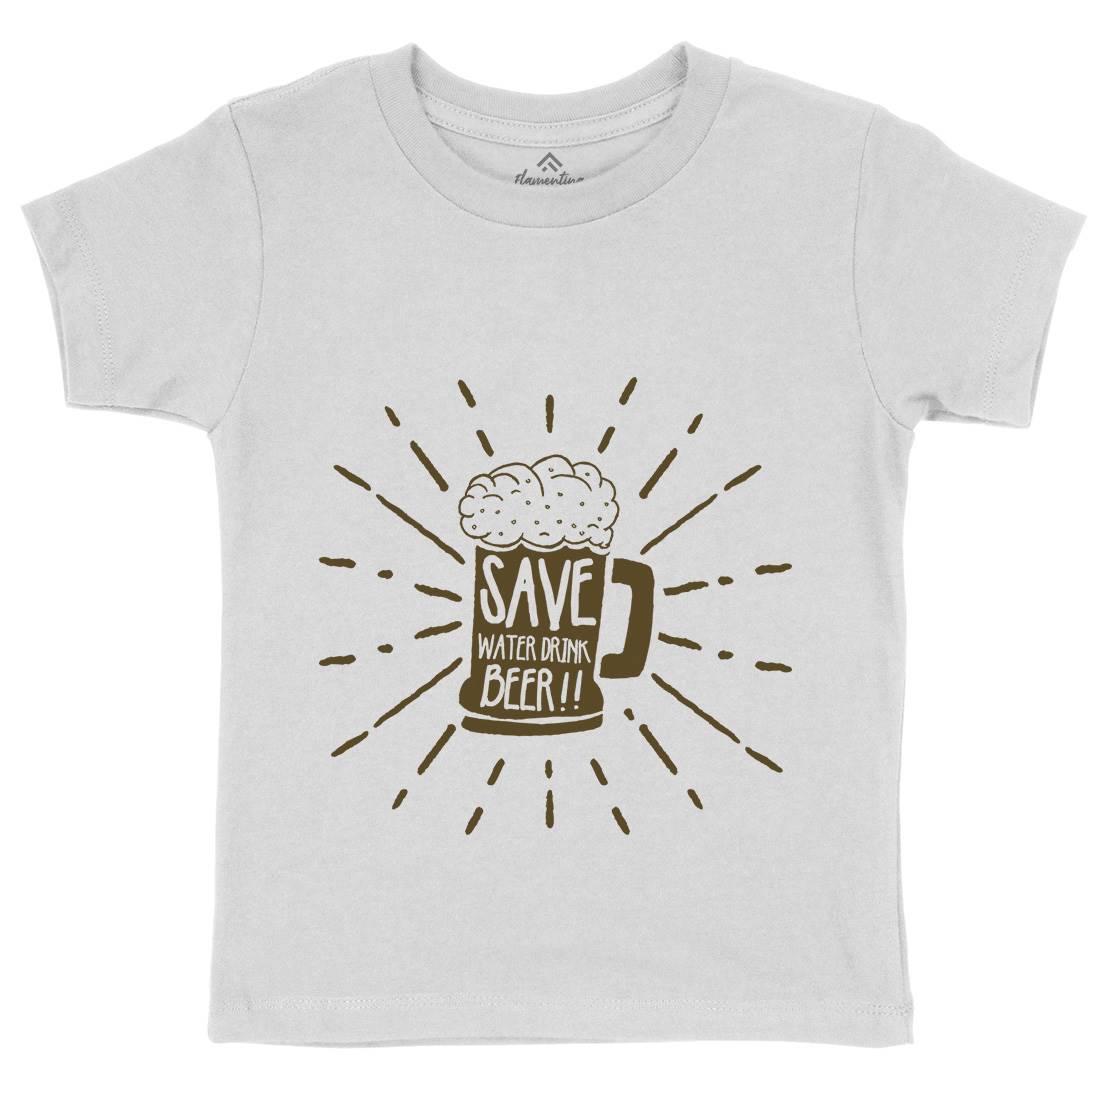 Save Water Kids Crew Neck T-Shirt Drinks A368